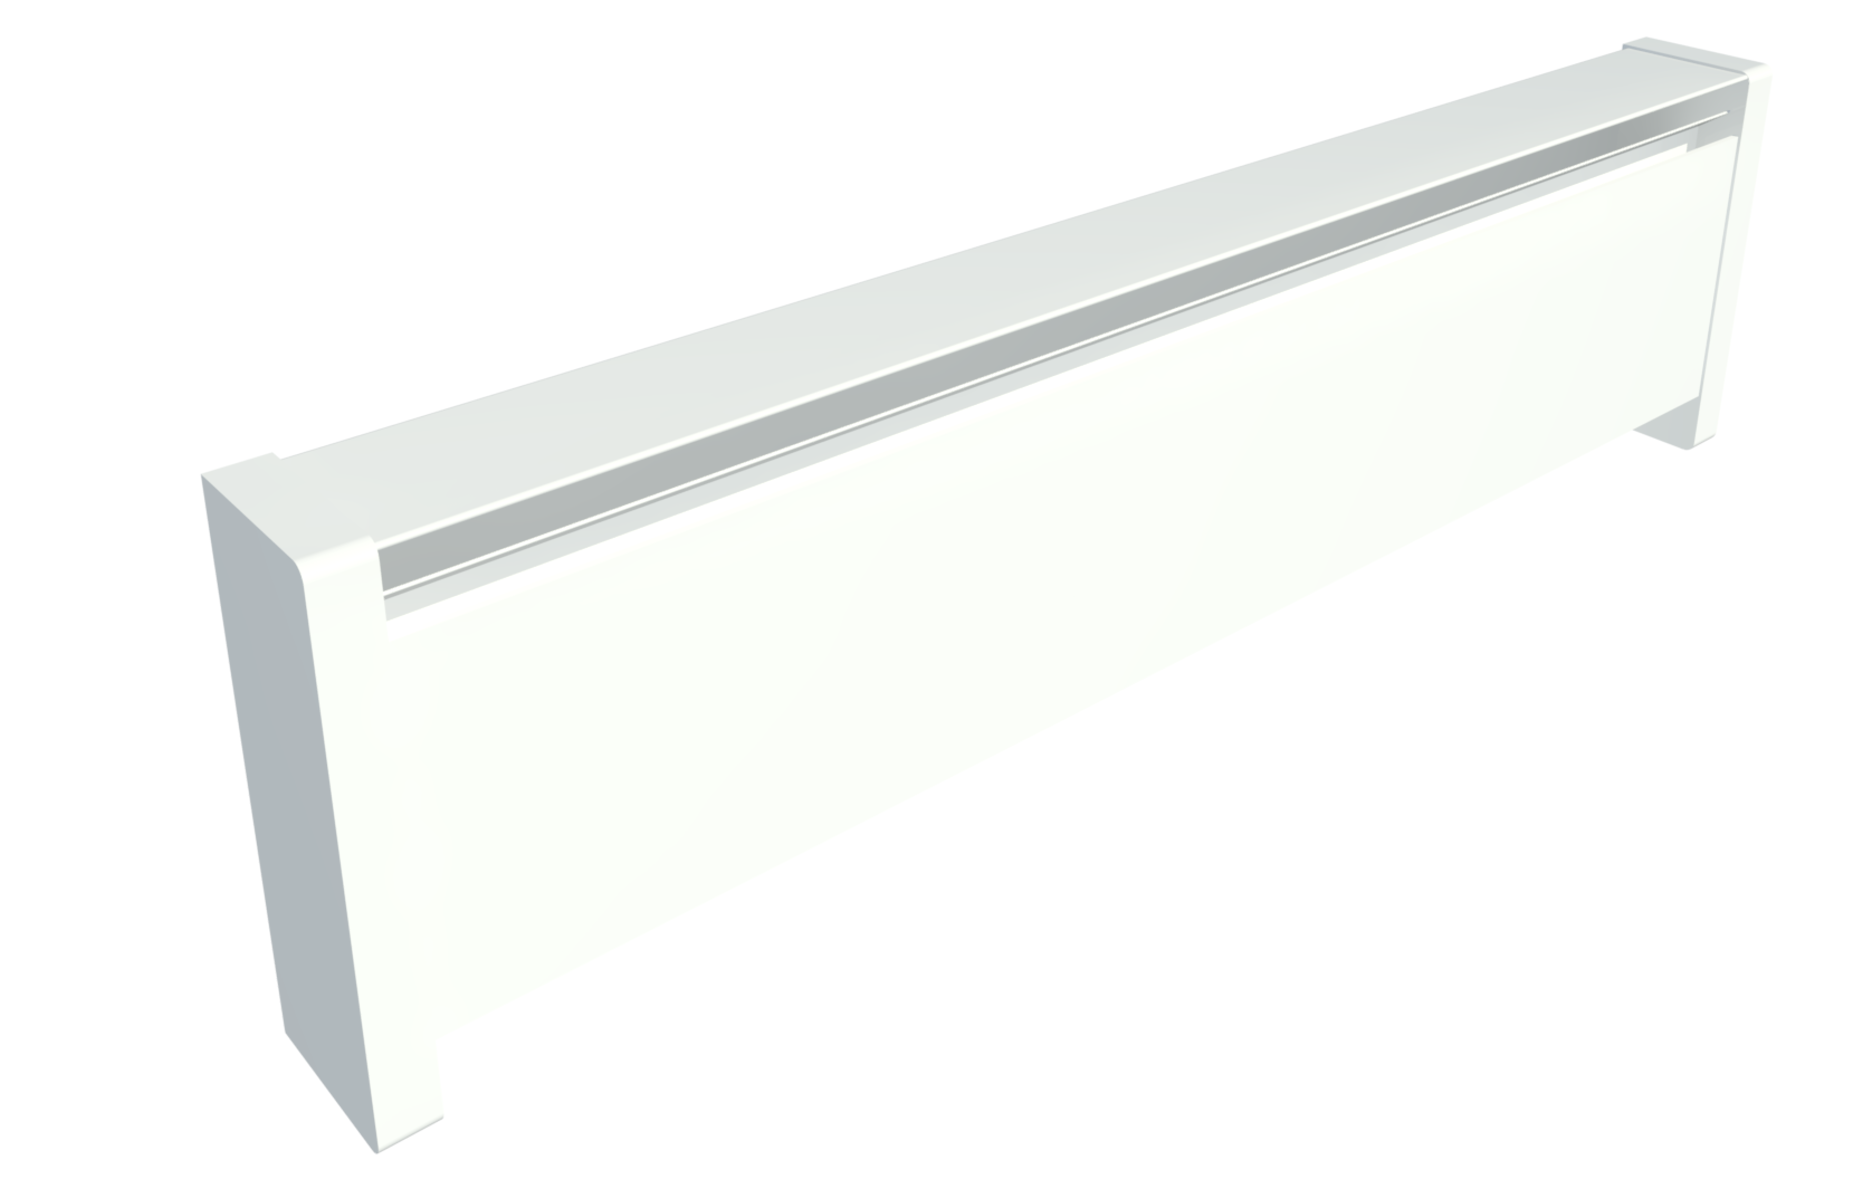 Render of a white, boxy, wall-mounted baseboard heater from Manufacturer Cadet, which can be placed along a wall.